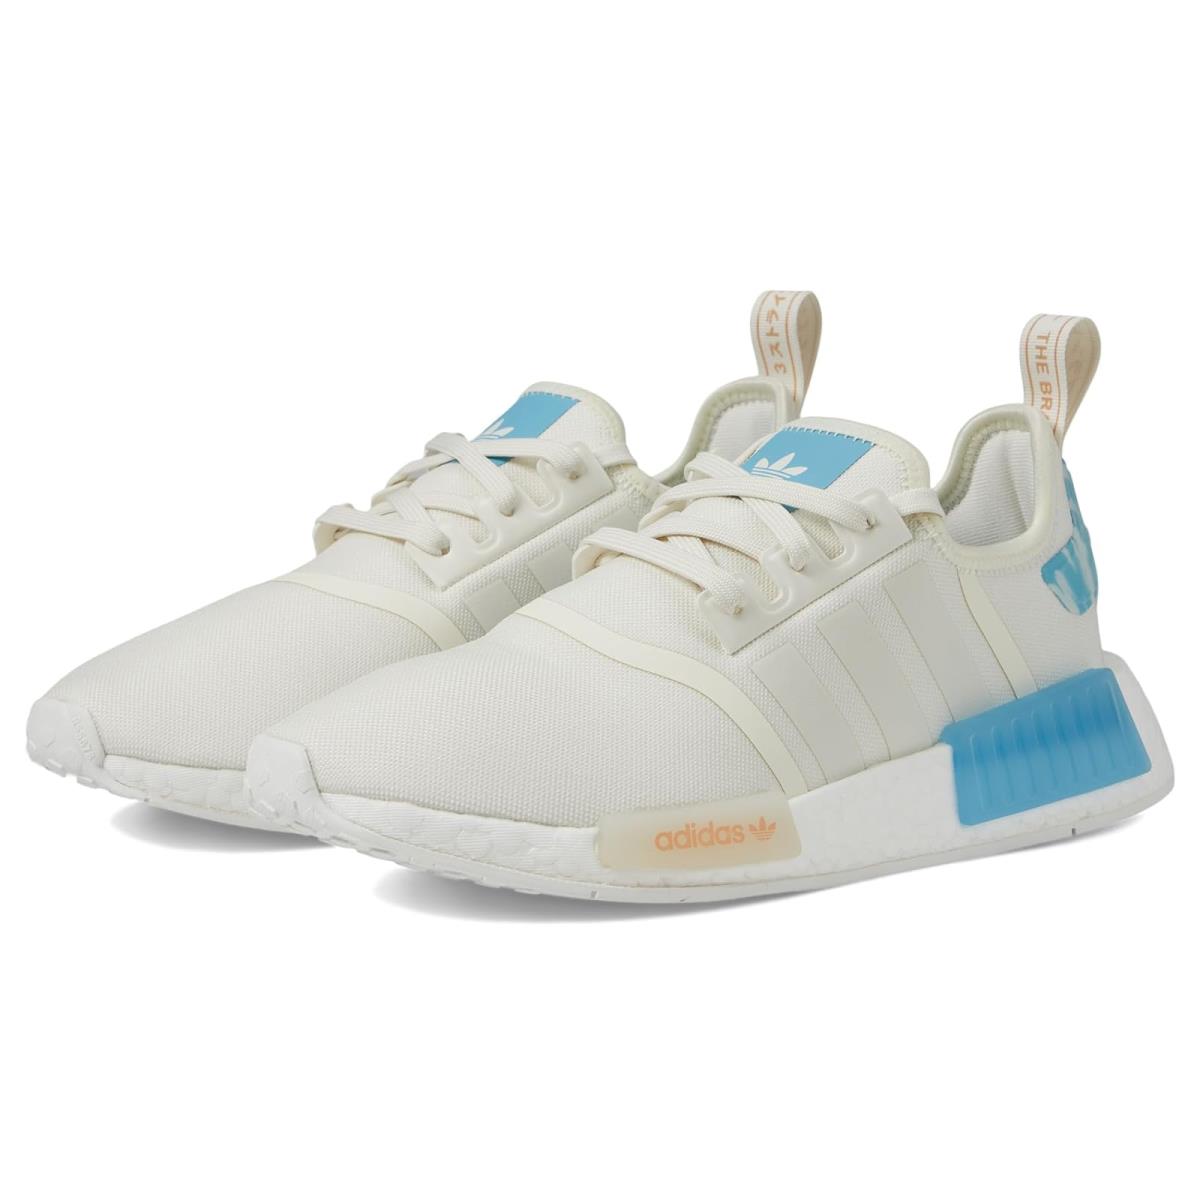 Woman`s Sneakers Athletic Shoes Adidas Originals NMD_R1 Off-White/Preloved Blue/Halo Blush